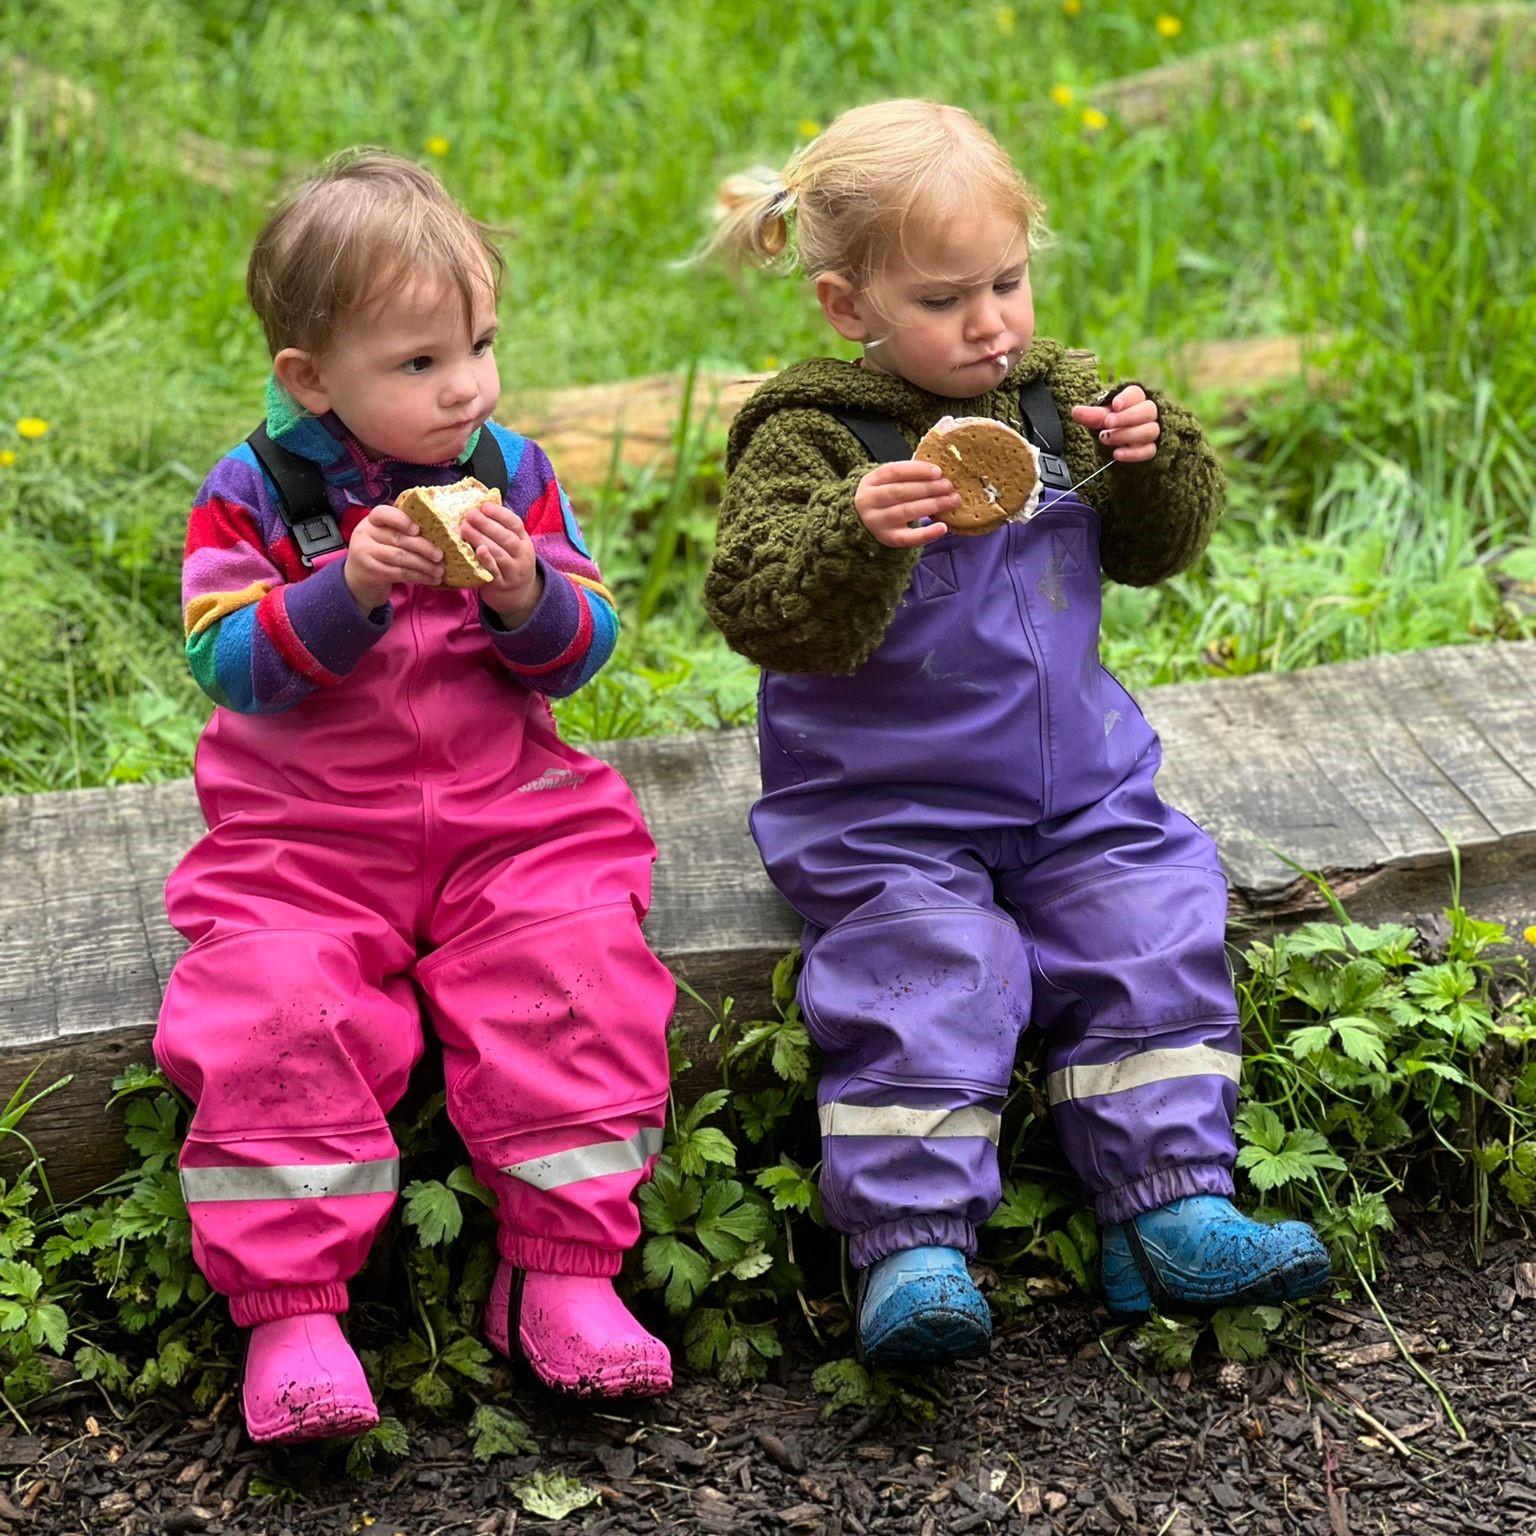 Official Forest School Kit List – Recommended Clothing | Wet Wednesdays